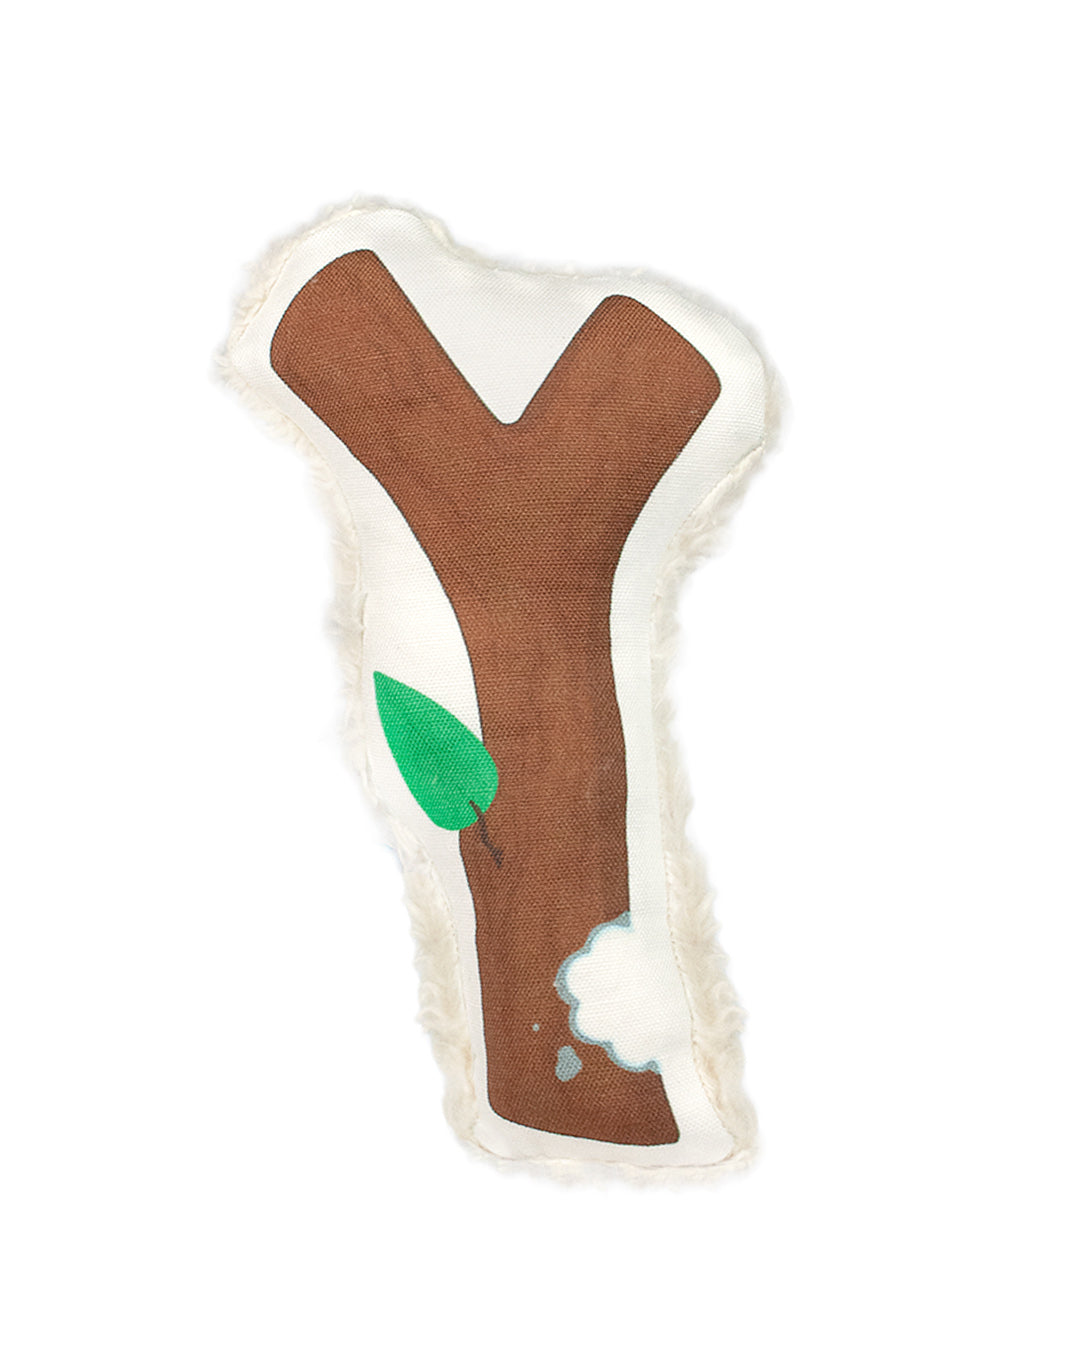 Eco-friendly dog toy shaped like a stick. Made with durable canvas and plush cotton sherpa. All materials are non-toxic and vegan-friendly. 